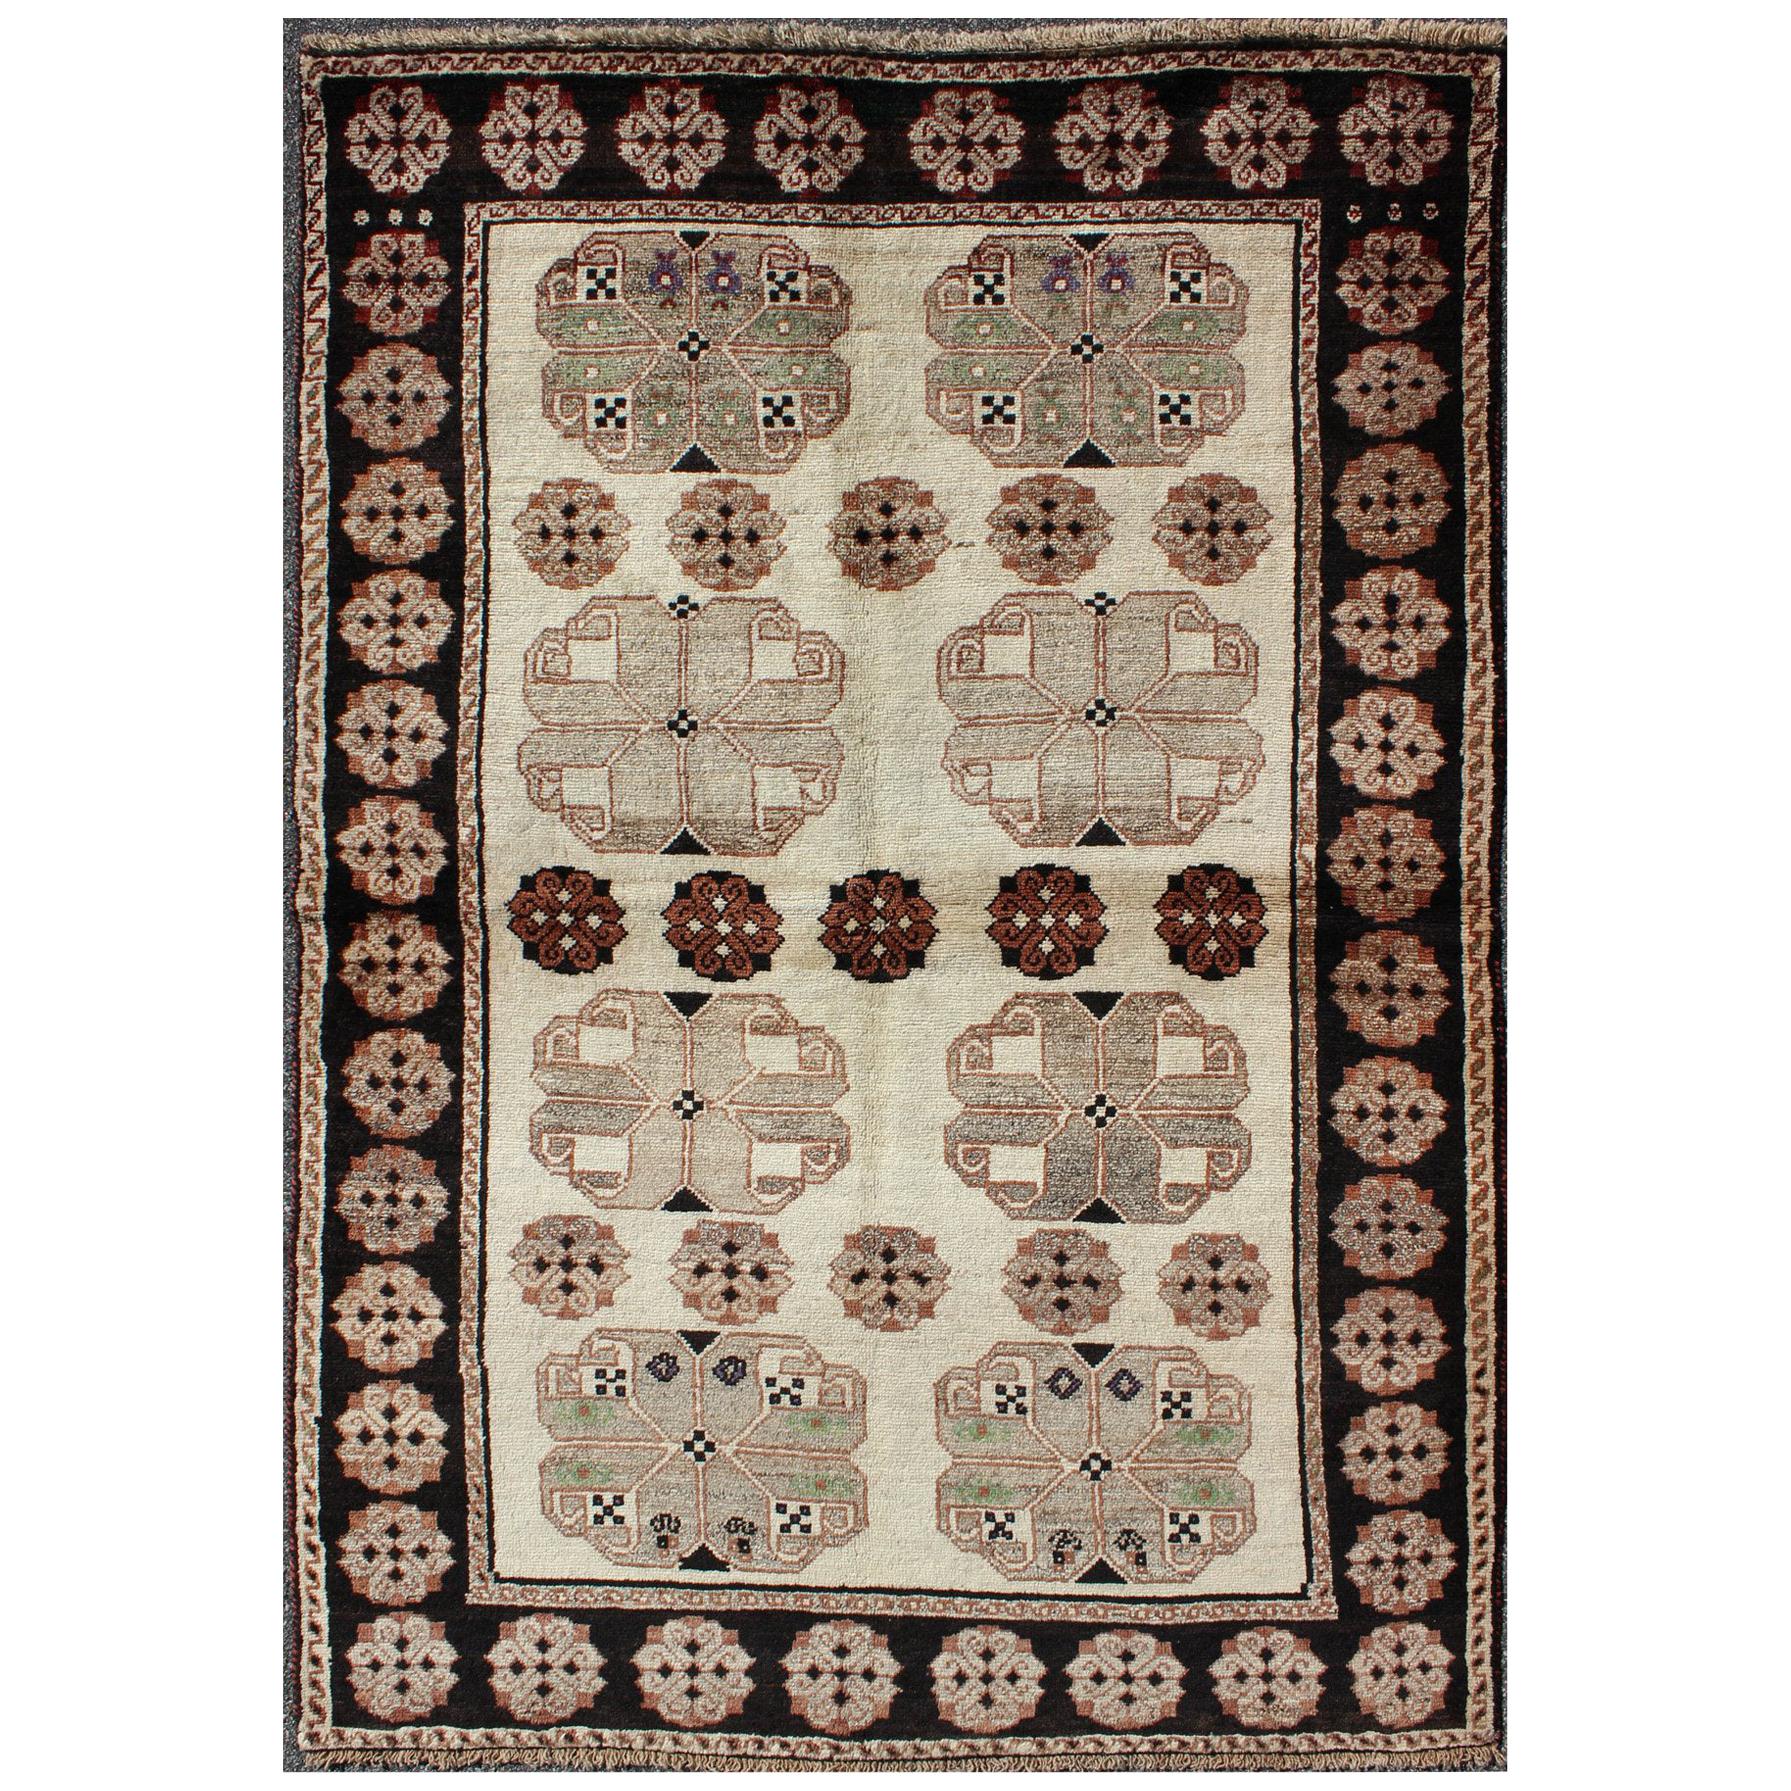 1950s Persian Gabbeh Vintage Rug with Blossom Medallions in Brown, Ivory, Onyx